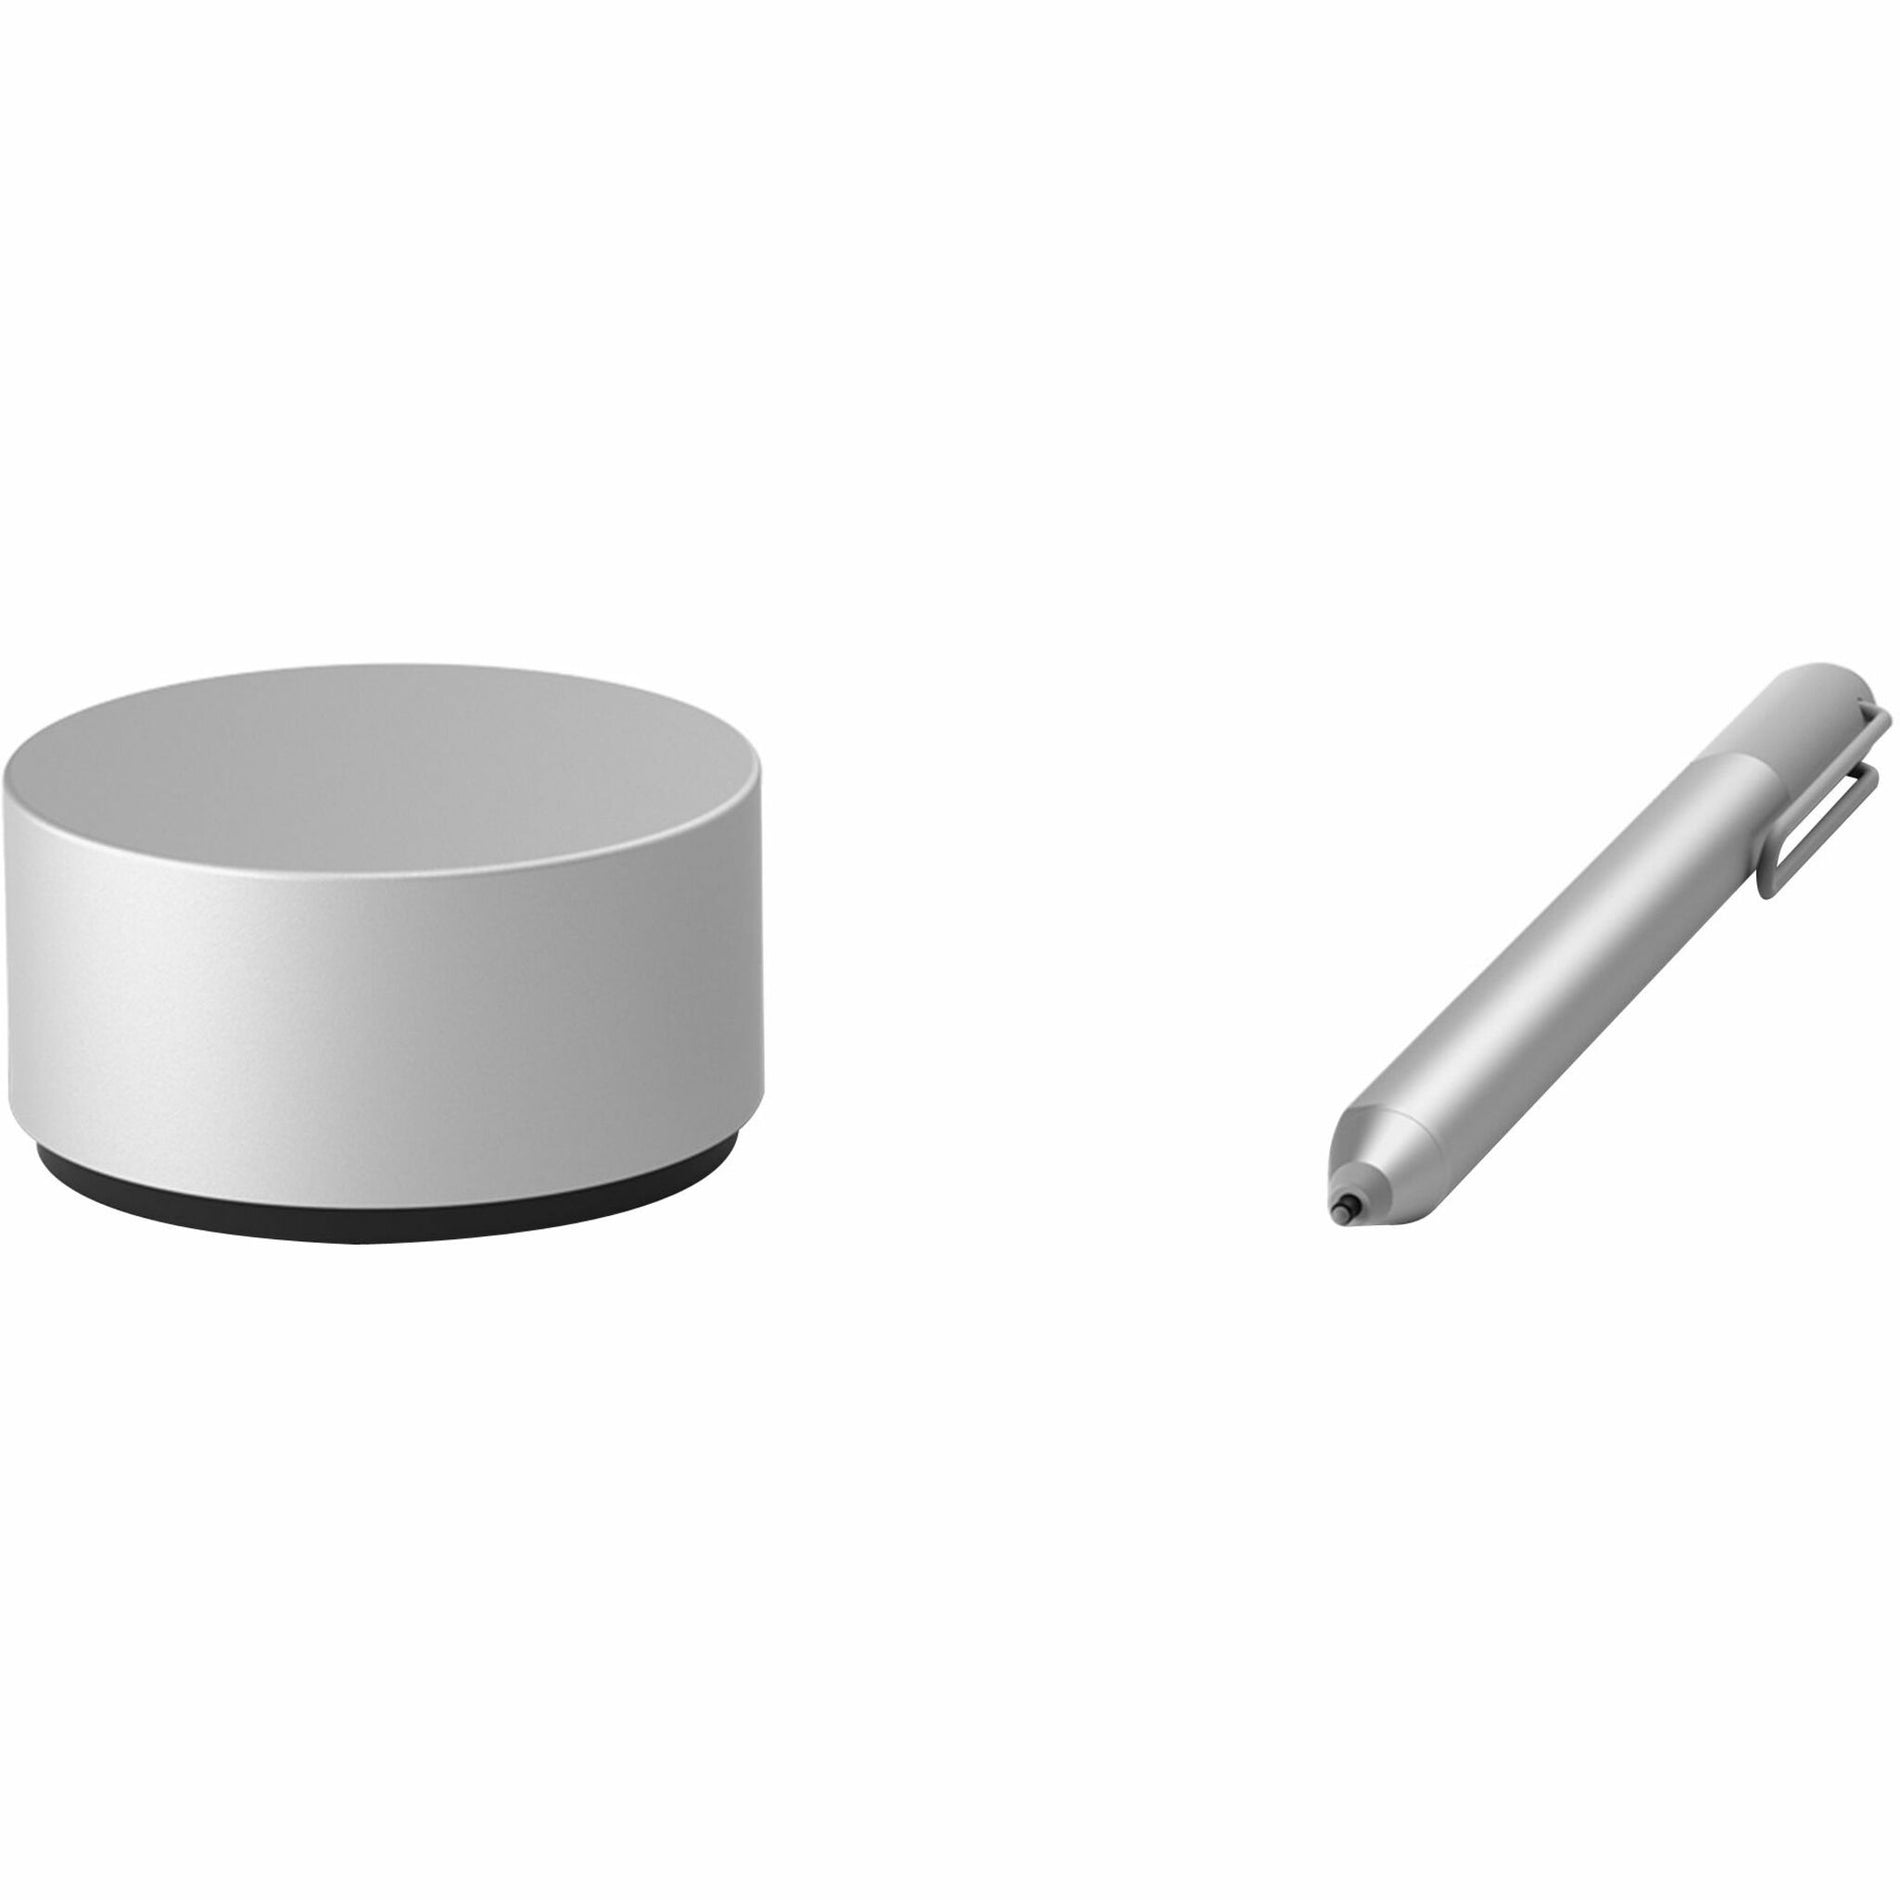 Microsoft 2WS-00001 Surface Dial 3D Input Device, Bluetooth Wireless Technology, Tablet Compatible